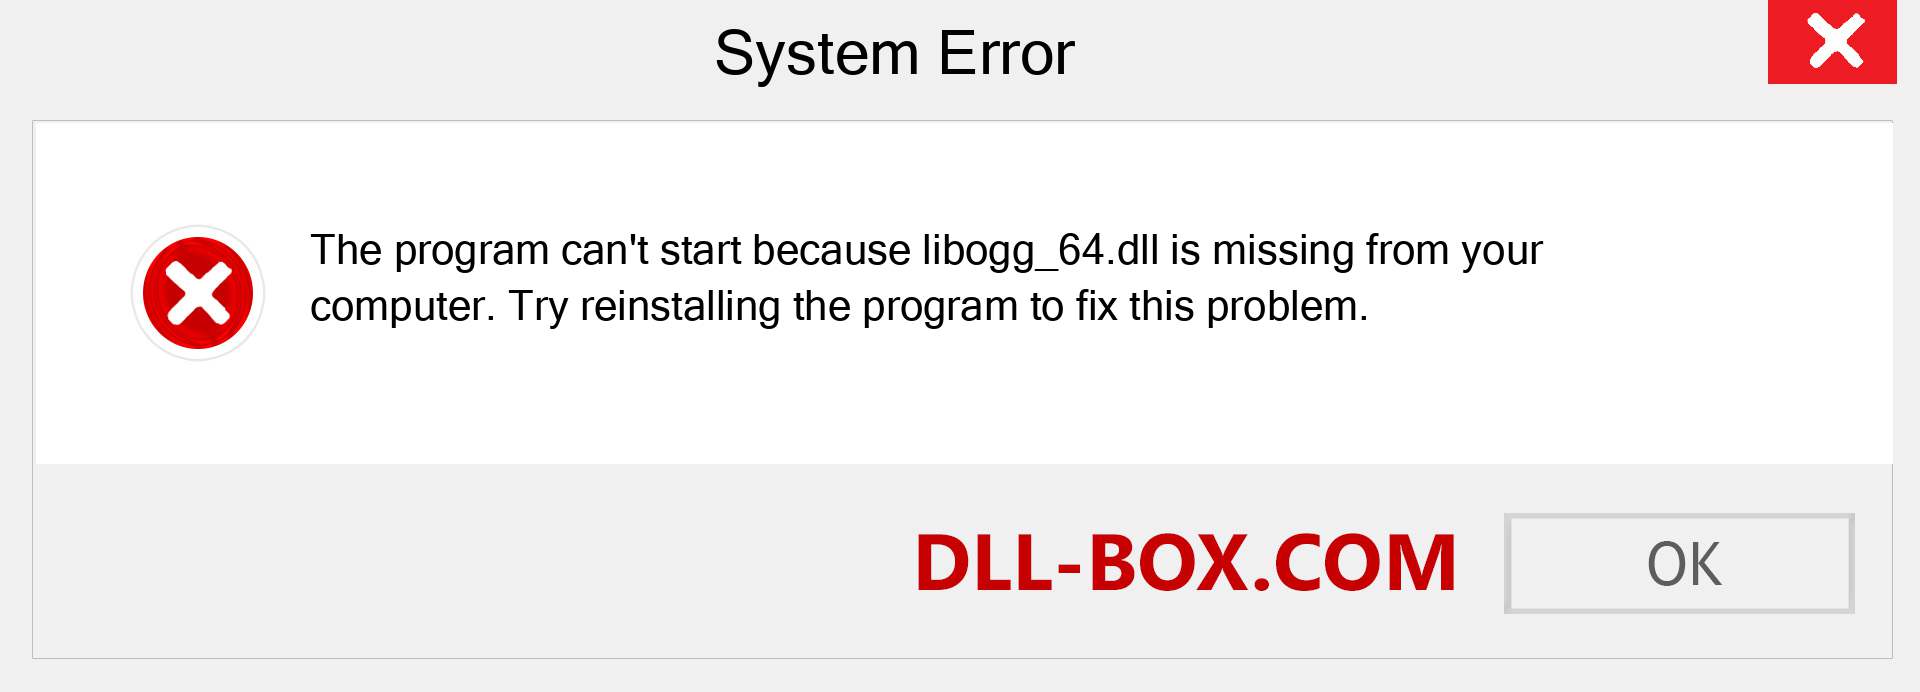  libogg_64.dll file is missing?. Download for Windows 7, 8, 10 - Fix  libogg_64 dll Missing Error on Windows, photos, images